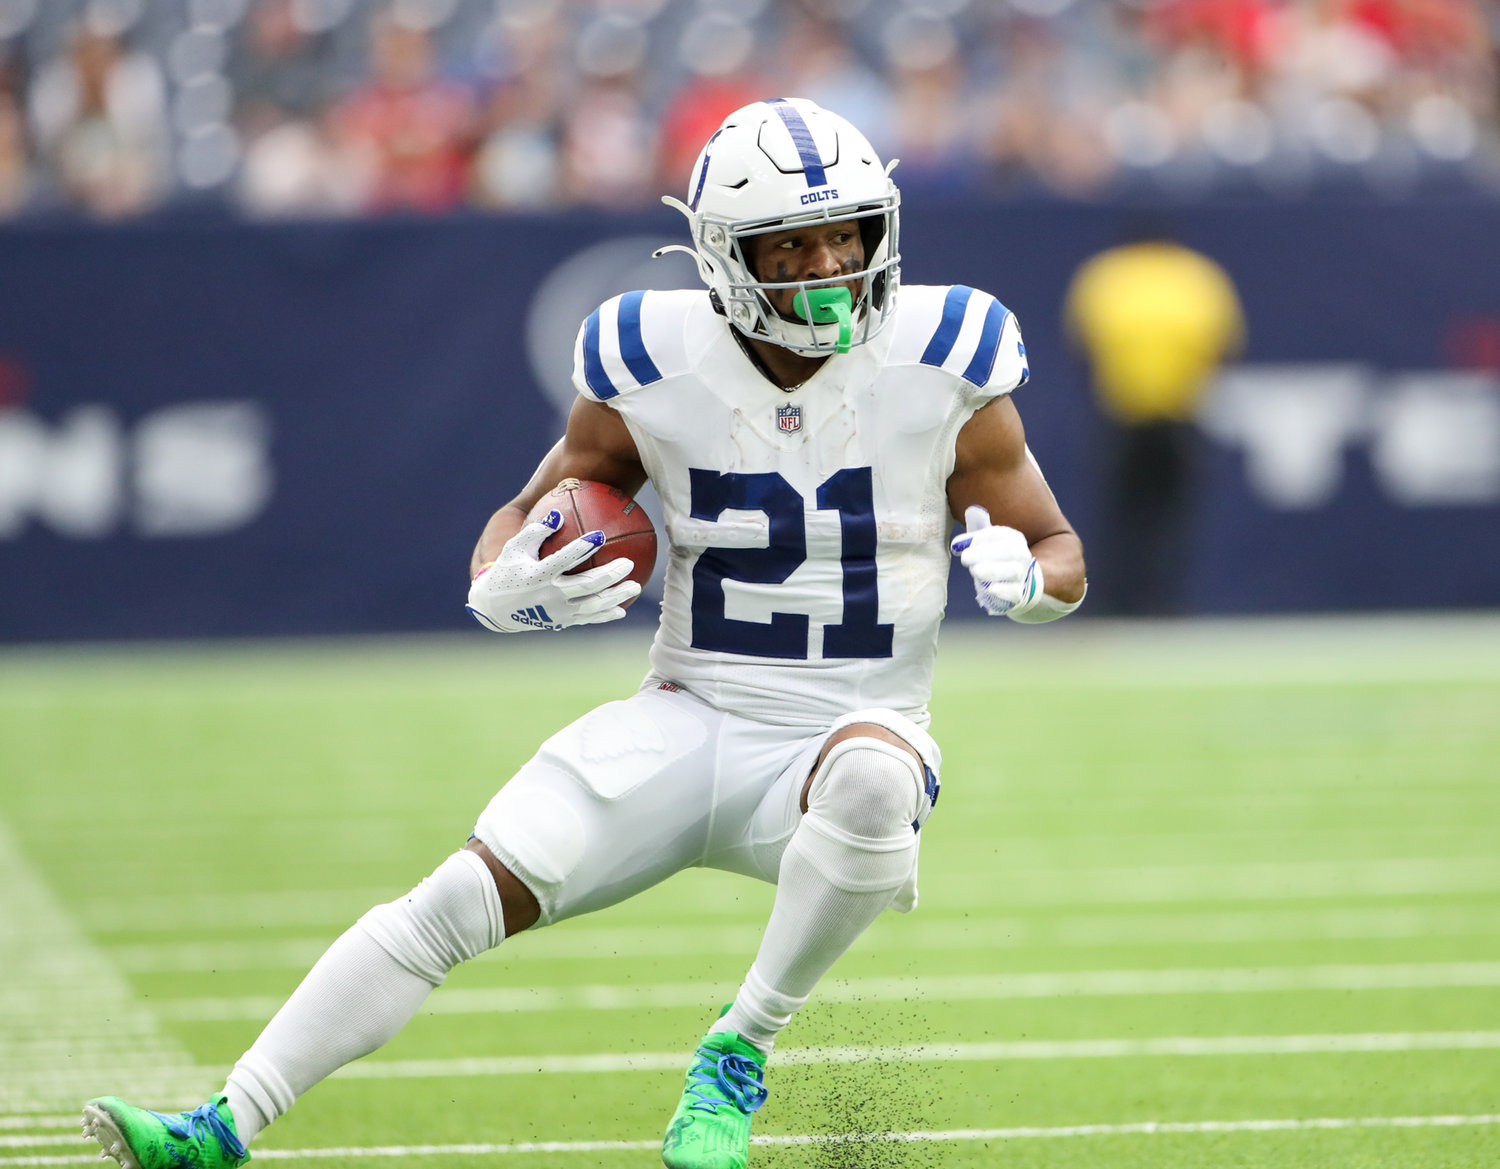 Indianapolis Colts running back Nyheim Hines (21) carries the ball during an NFL game between the Texans and the Colts on December 5, 2021 in Houston, Texas.